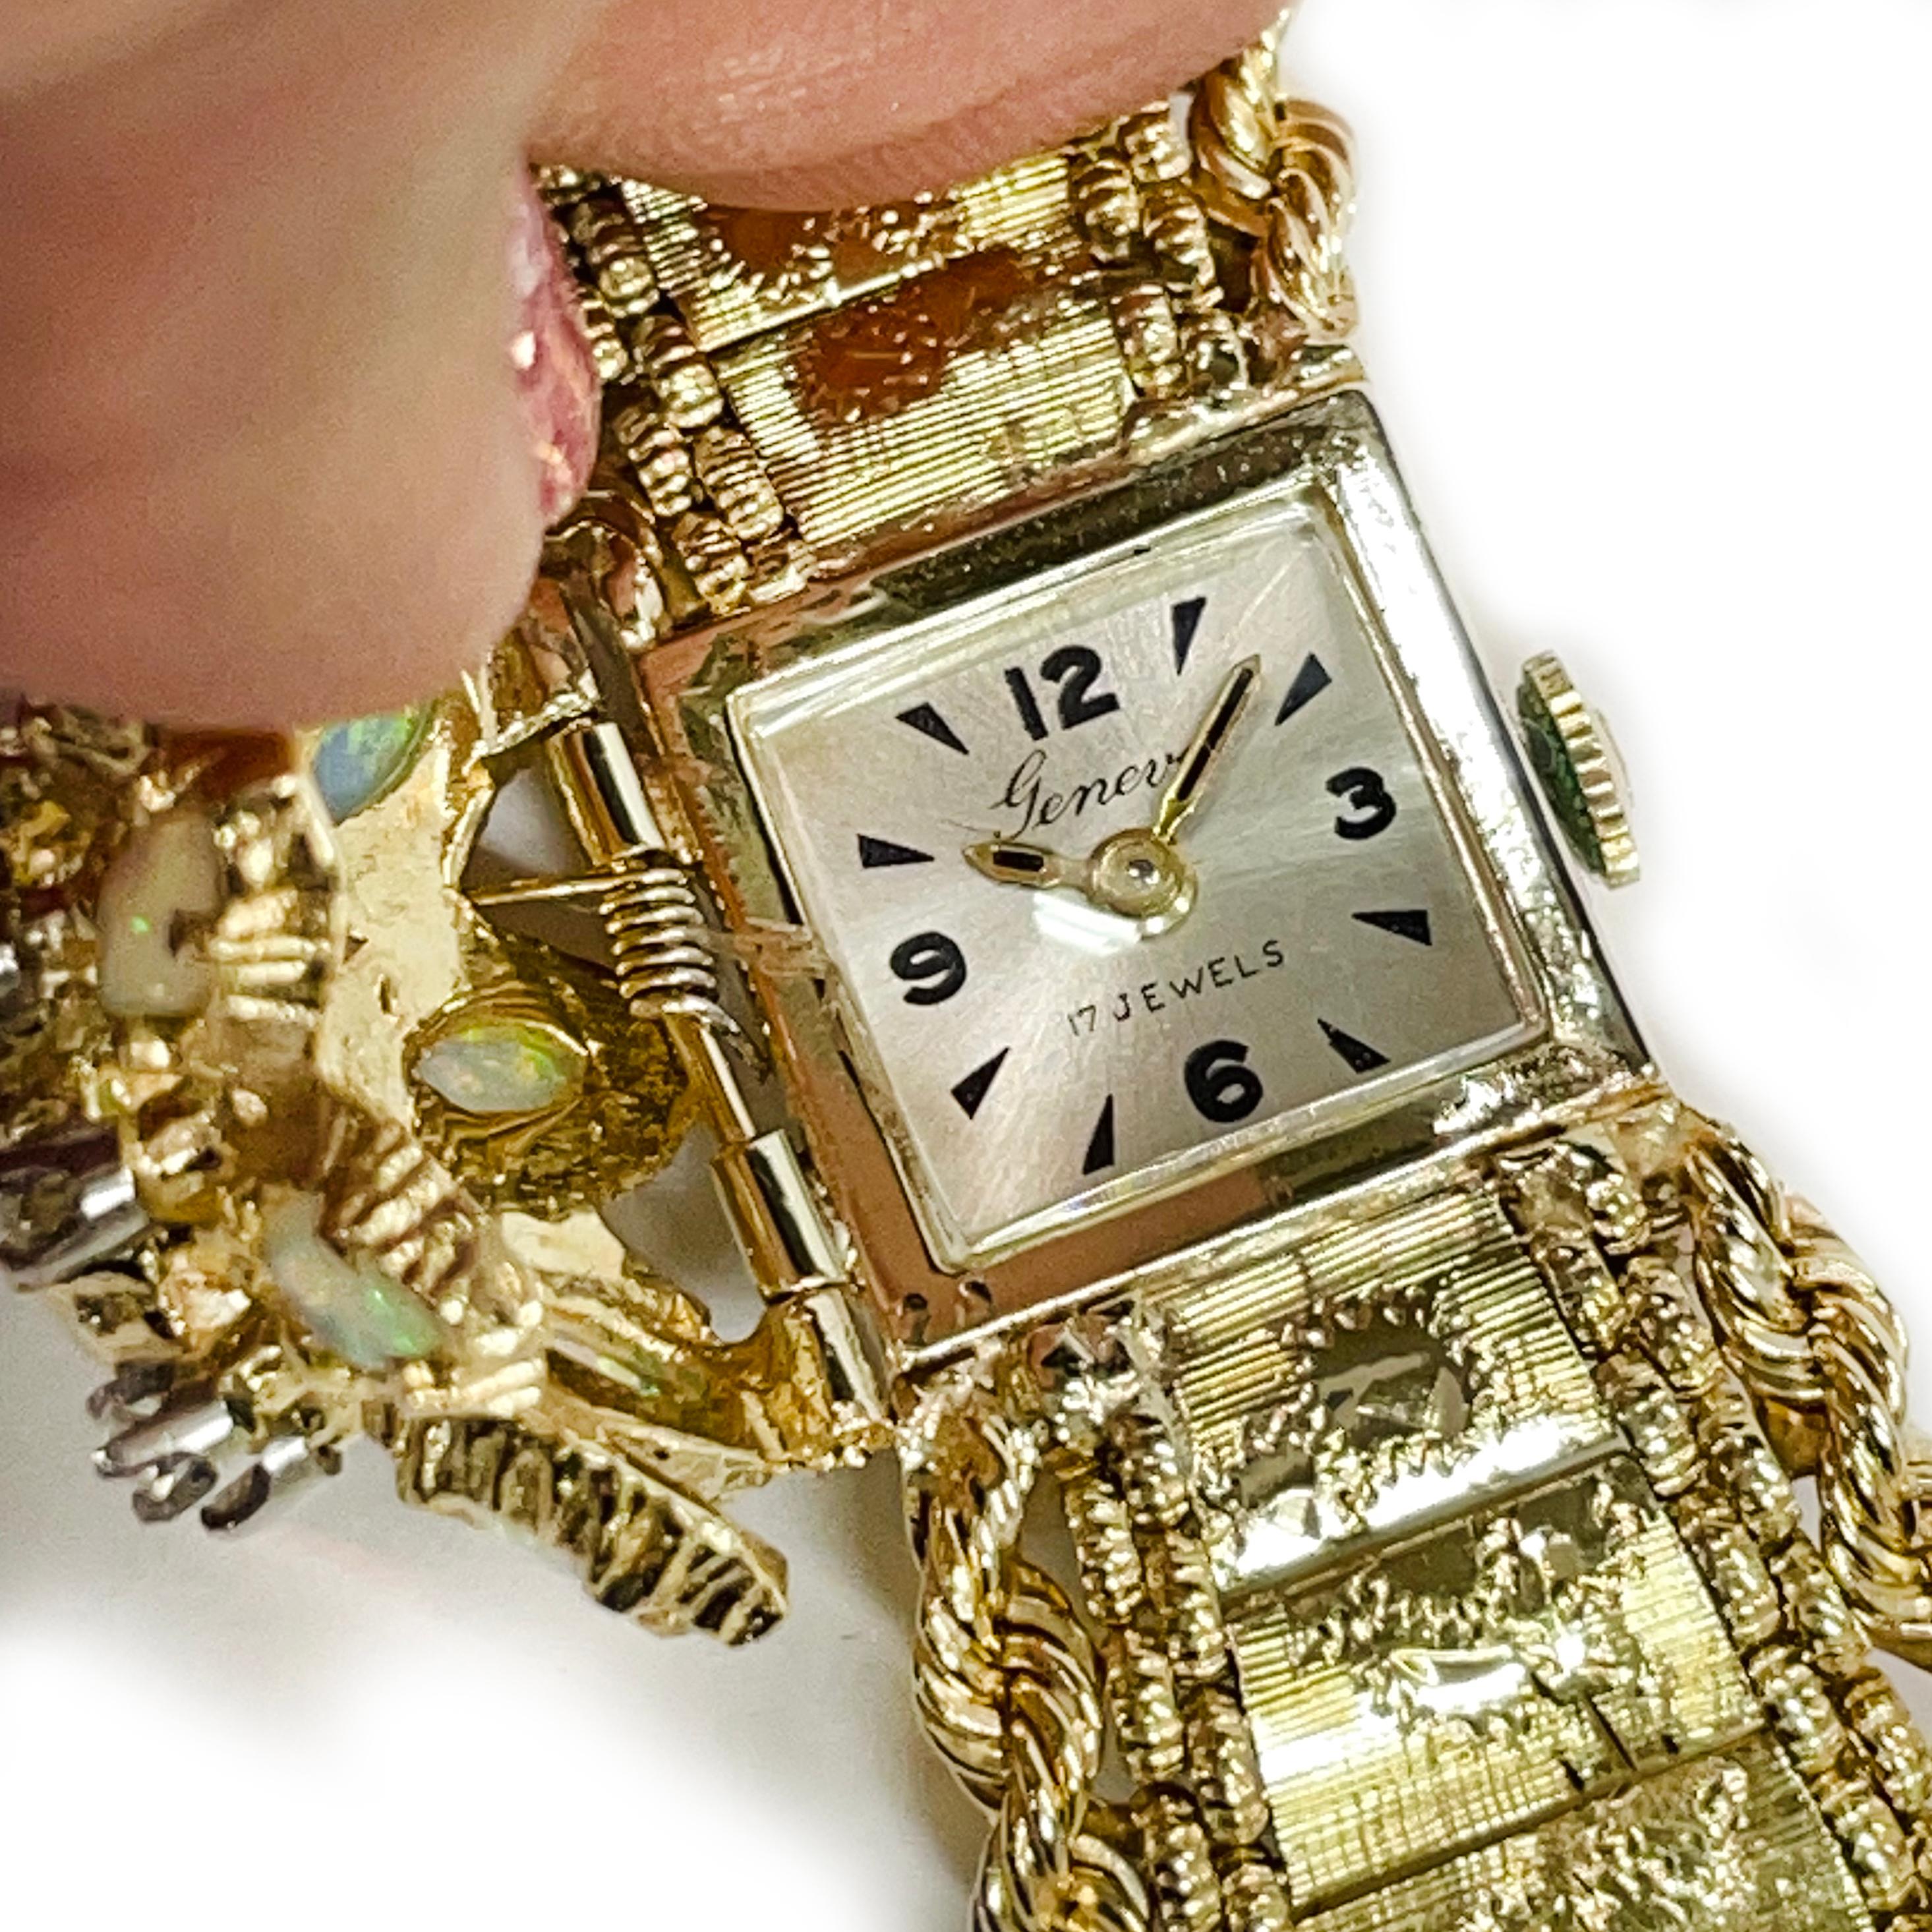 Geneva 14 Karat Yellow Gold 17 Jewels Opal Diamond Wristwatch. This exquisite watch features a hinged top with marquise opal stones and round diamonds. There are eight marquise measuring 5.5 x 3.0mm and one marquise opal at the center measuring 8.0